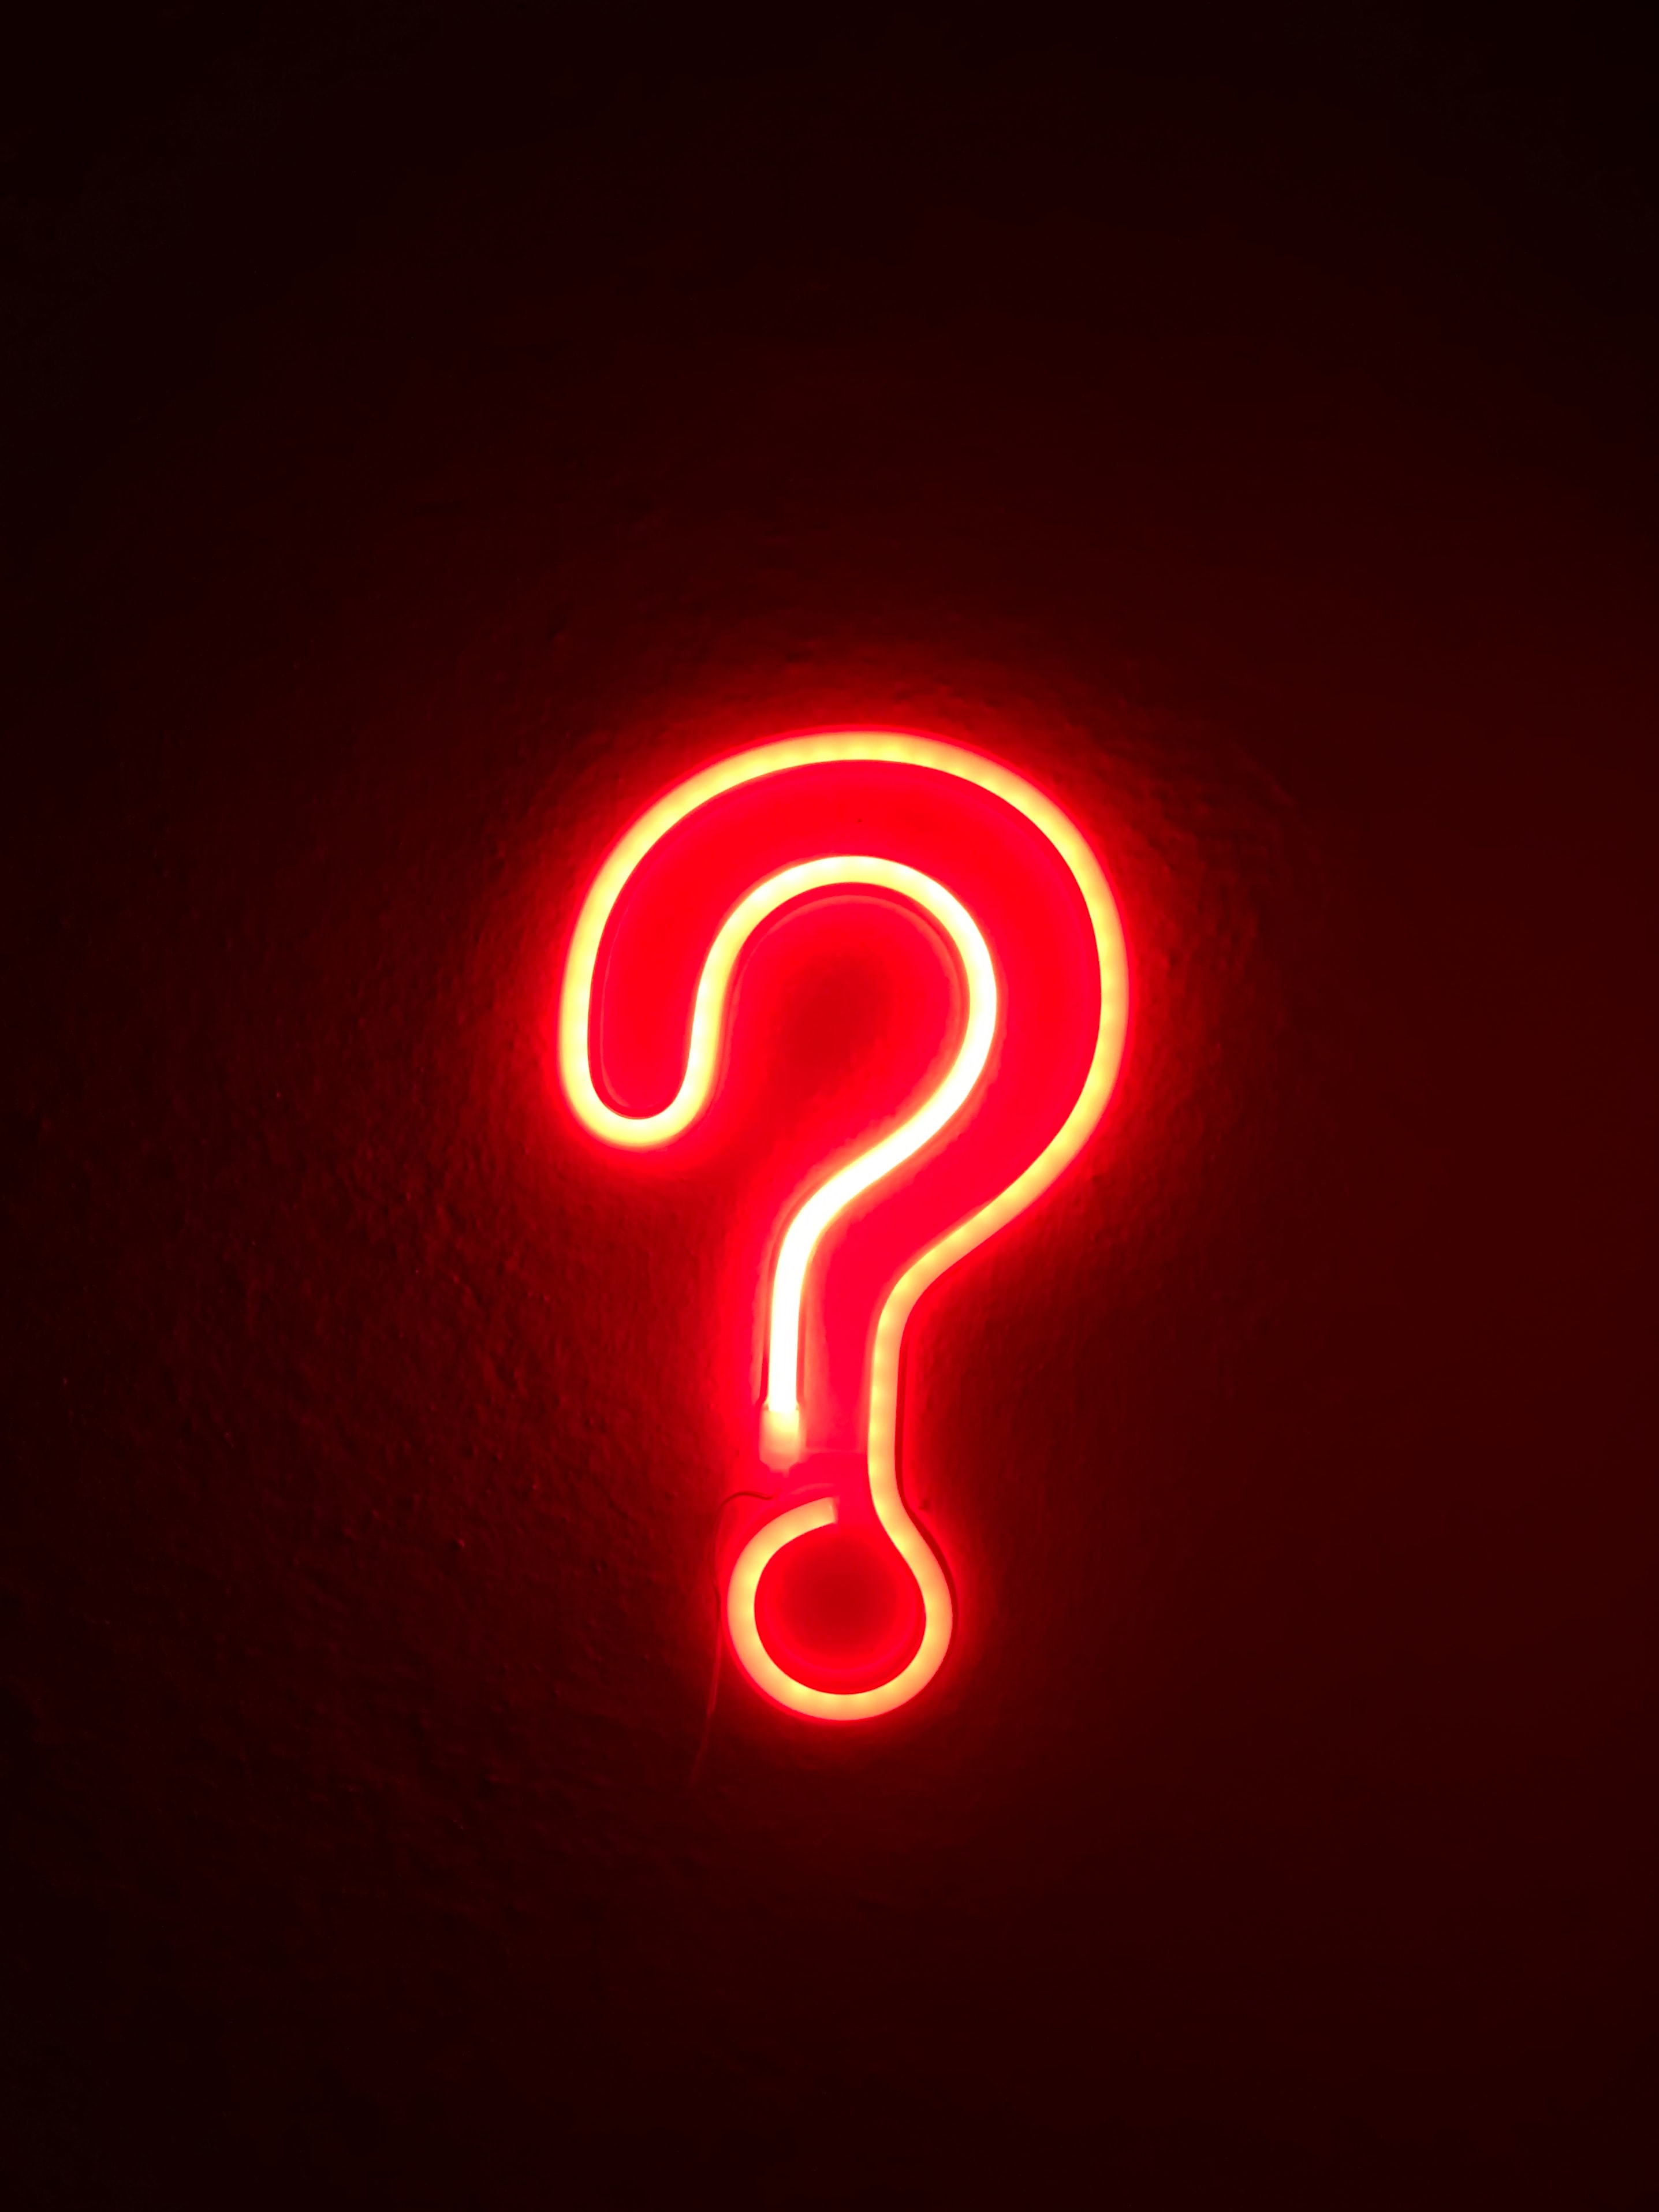 LED light question mark for asking questions to your signage provider